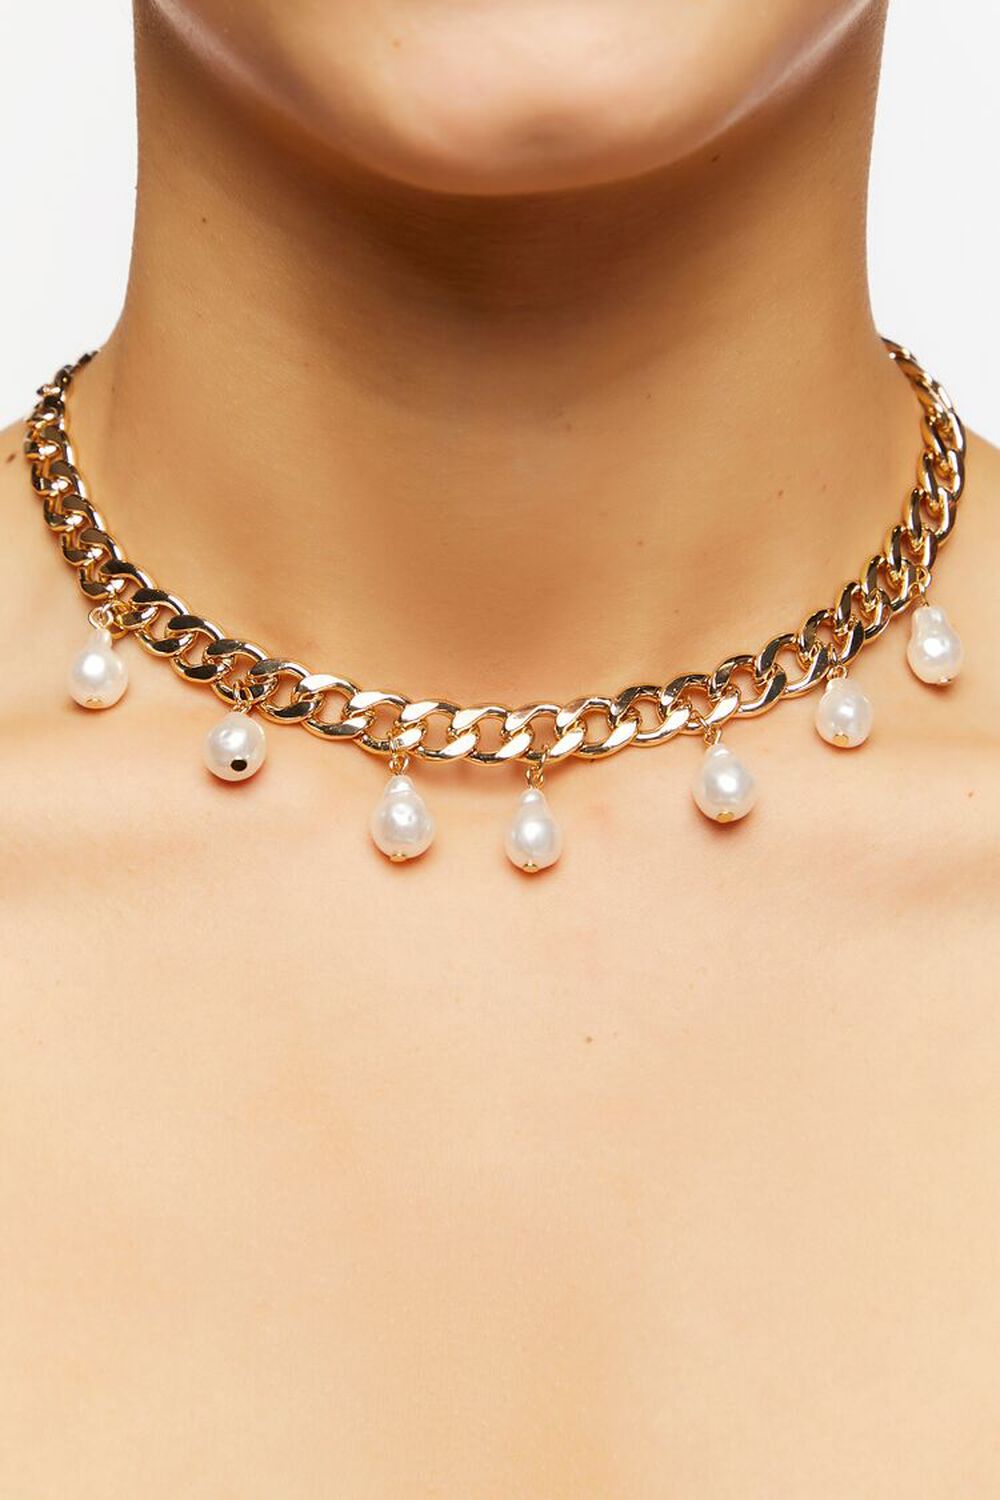 CREAM/GOLD Faux Pearl Curb Chain Necklace, image 1